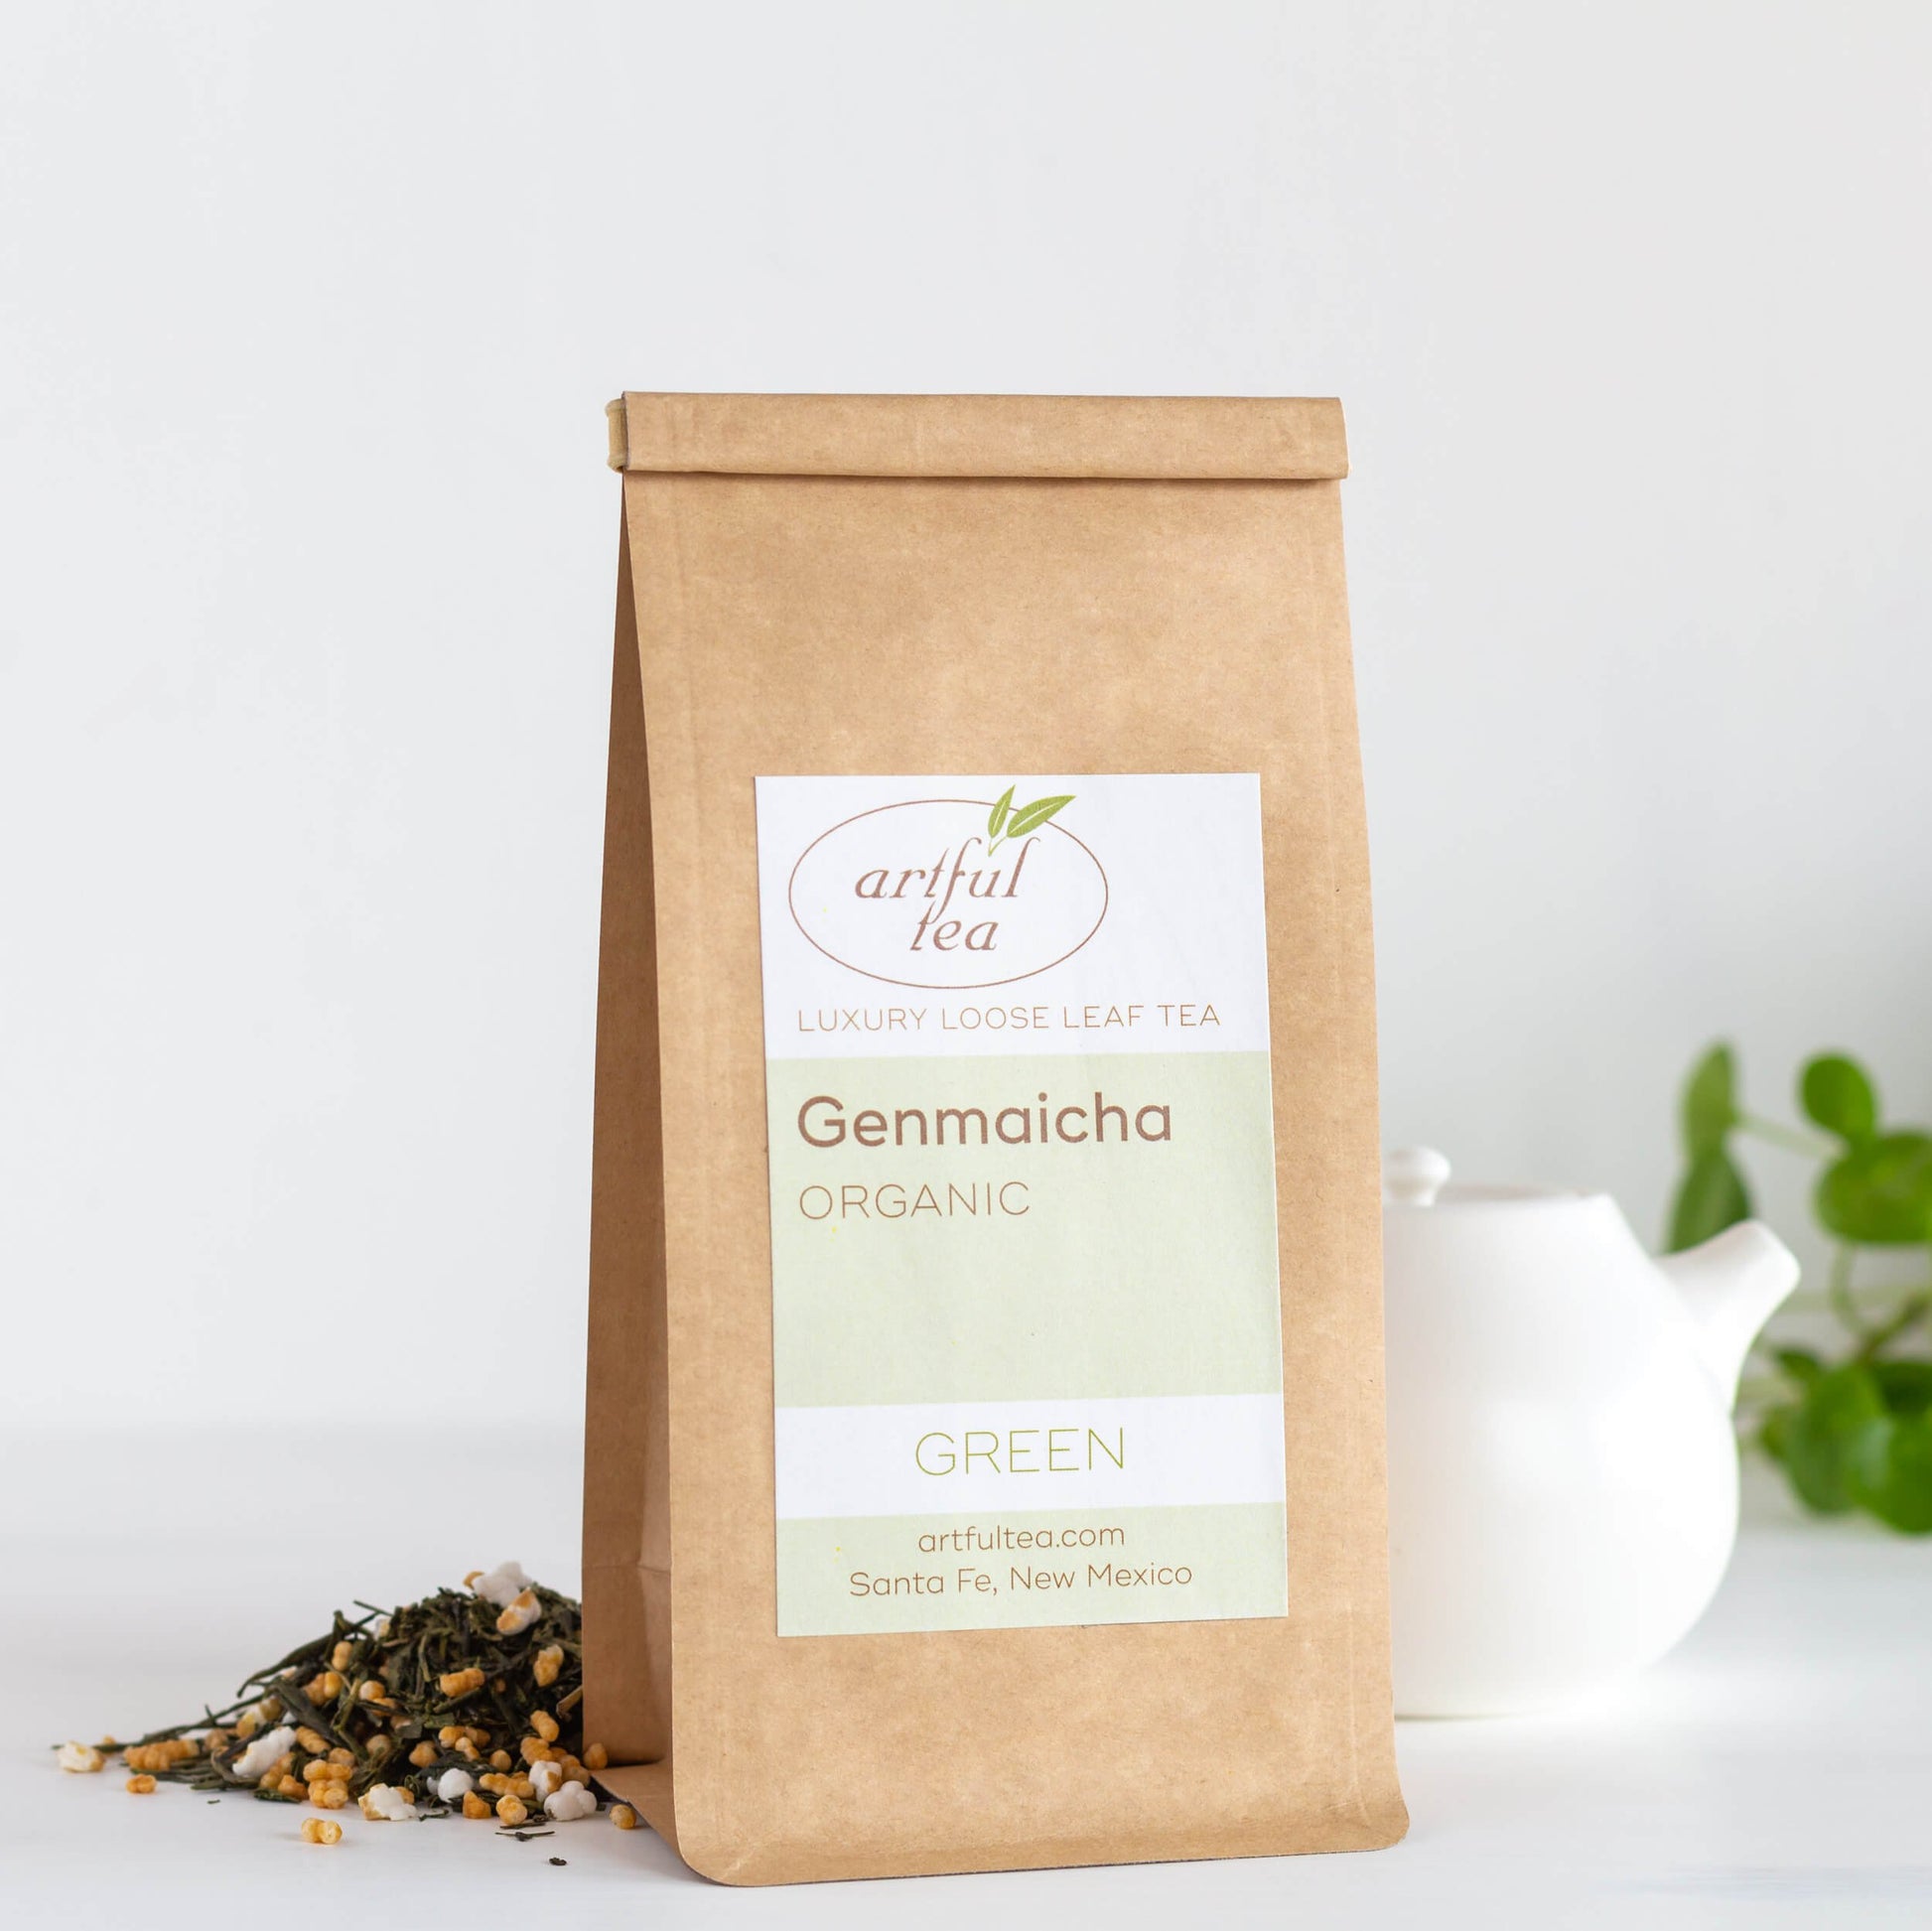 Genmaicha Organic Green Tea shown packaged in a kraft bag with loose tea leaves and a white teapot displayed behind the bag.